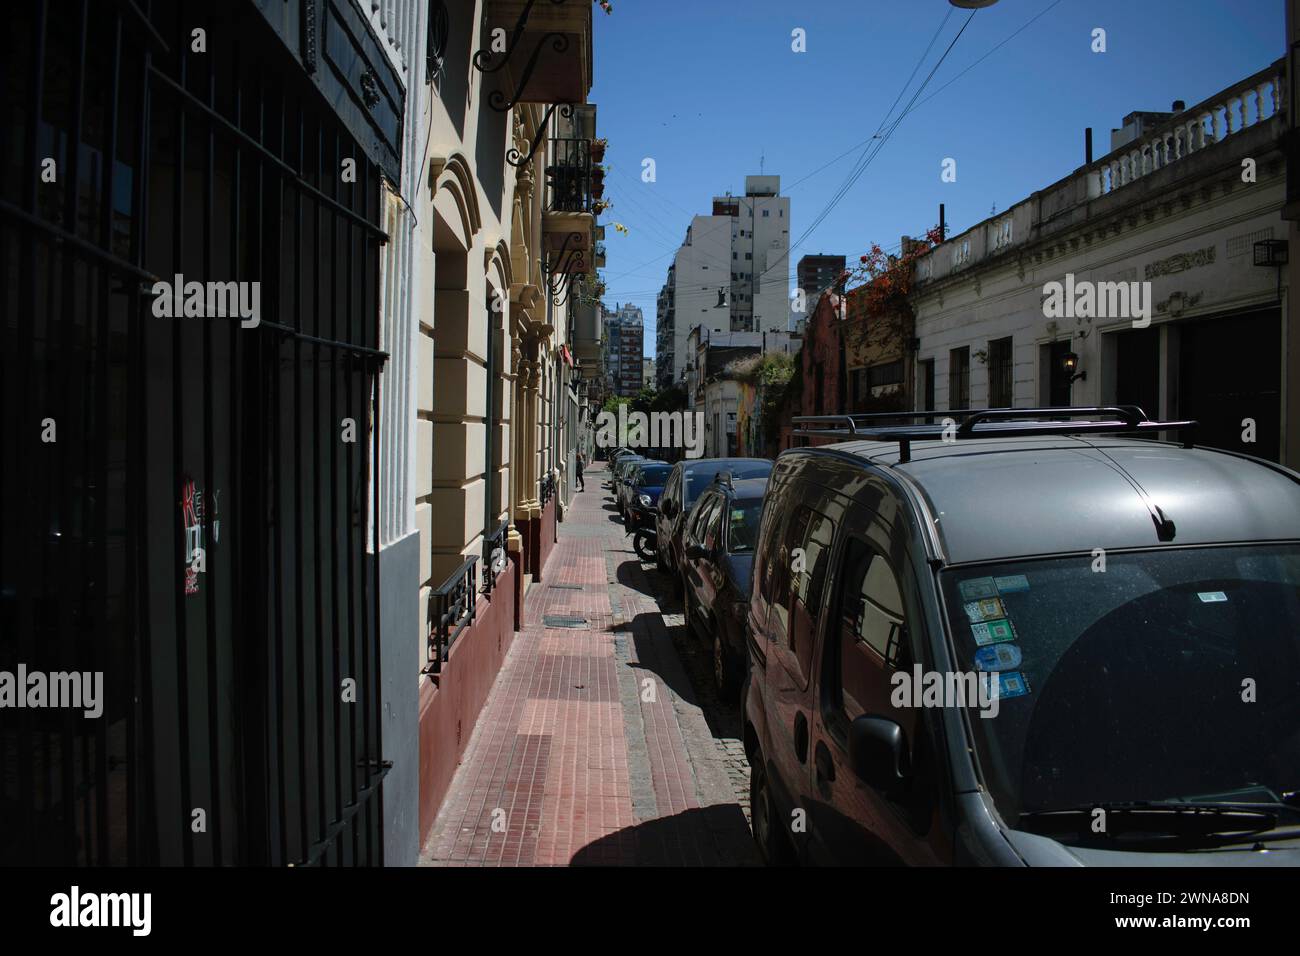 San Telmo is a historic neighborhood located in Buenos Aires, Argentina. It's renowned for its cobblestone streets, colonial architecture. Stock Photo